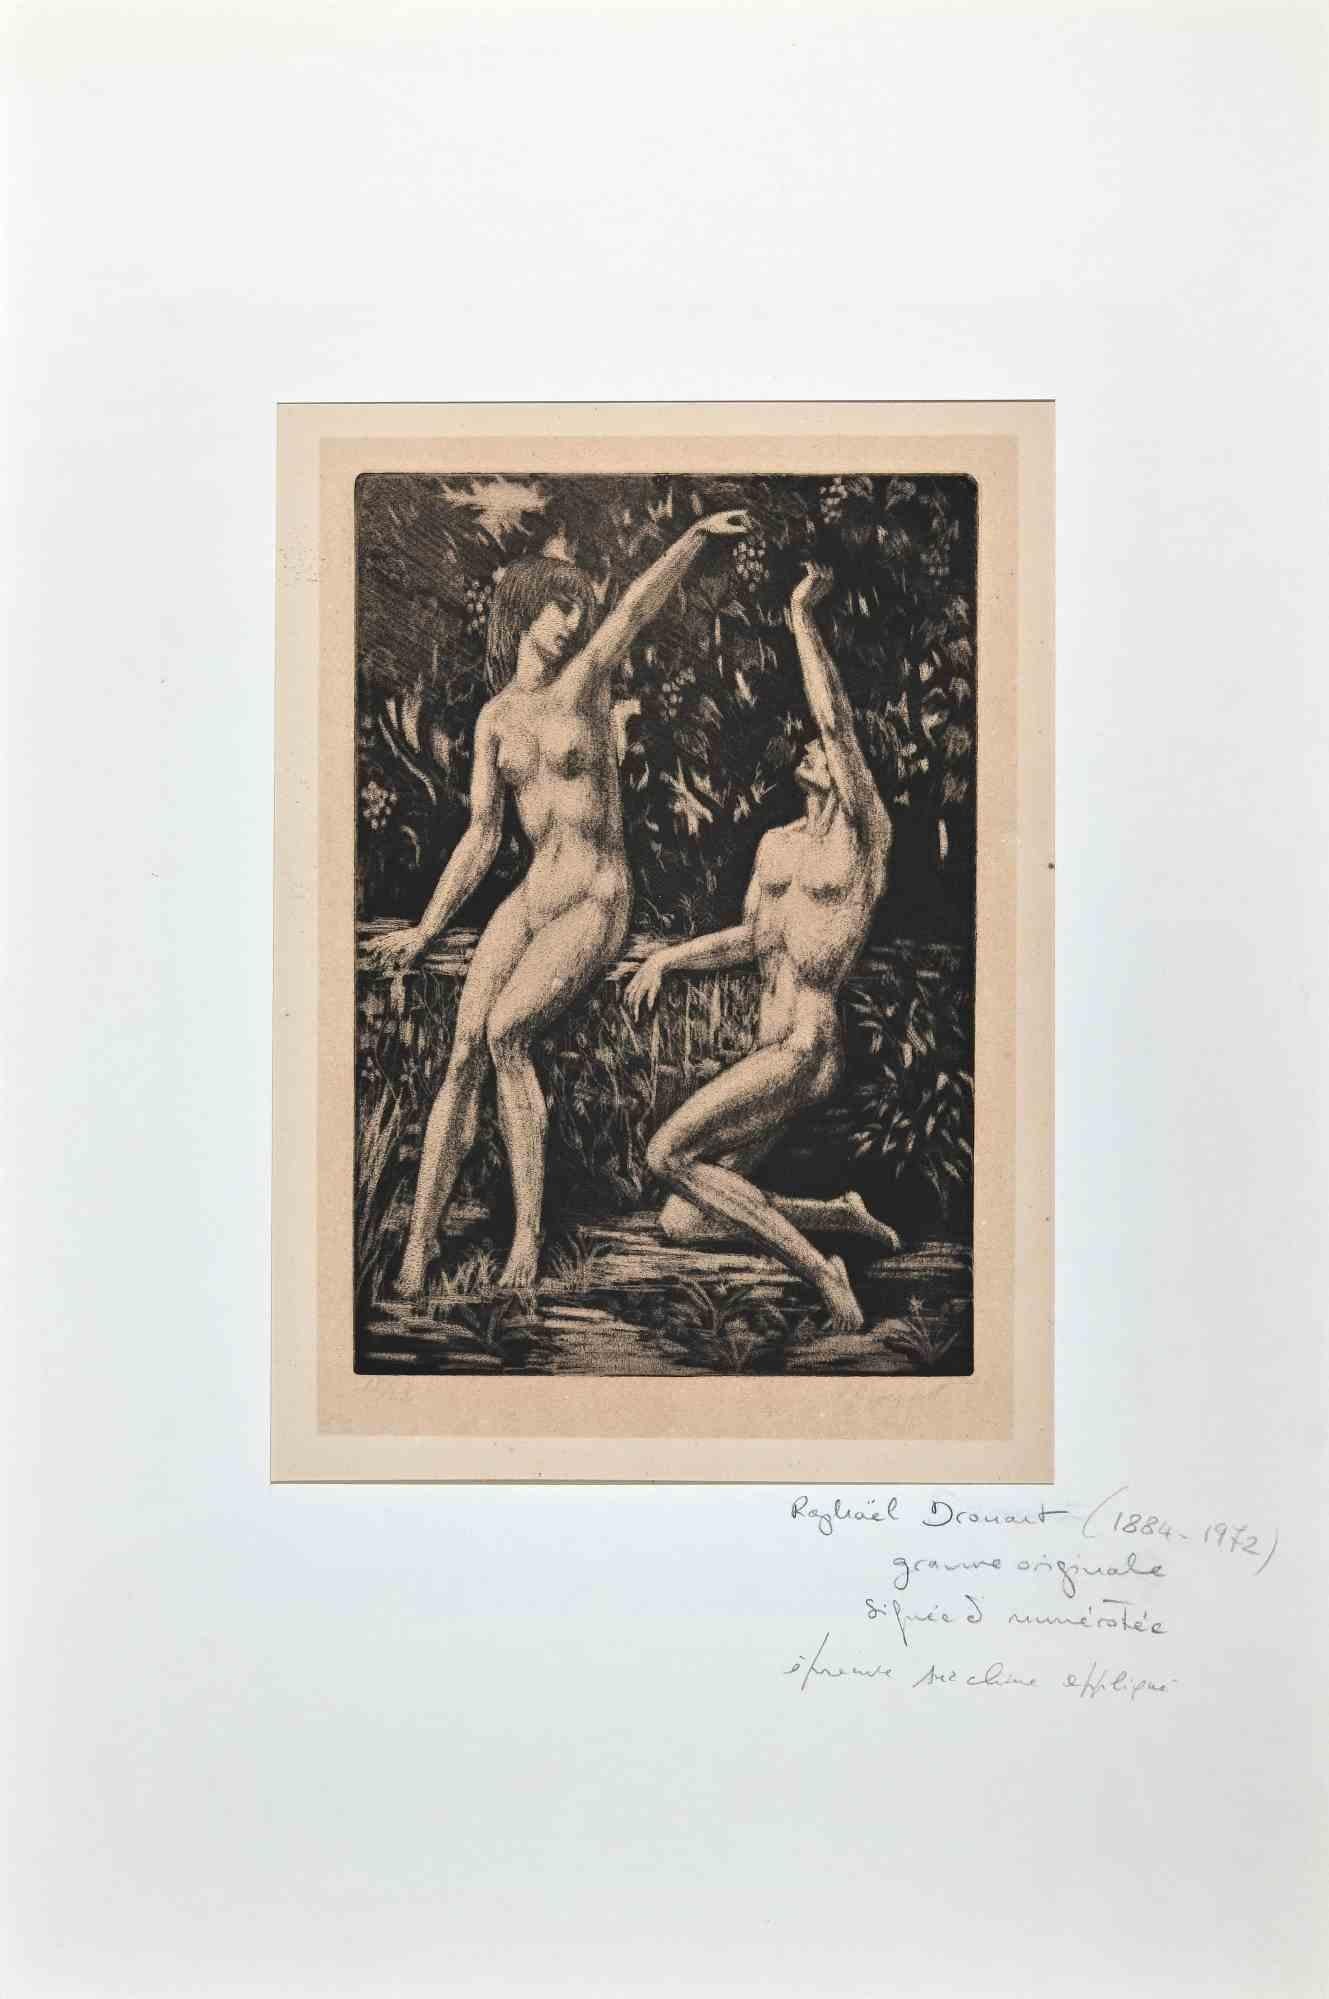 Dead Nudes - Original Etching by Raphael Drouart - Early 20th century For Sale 1